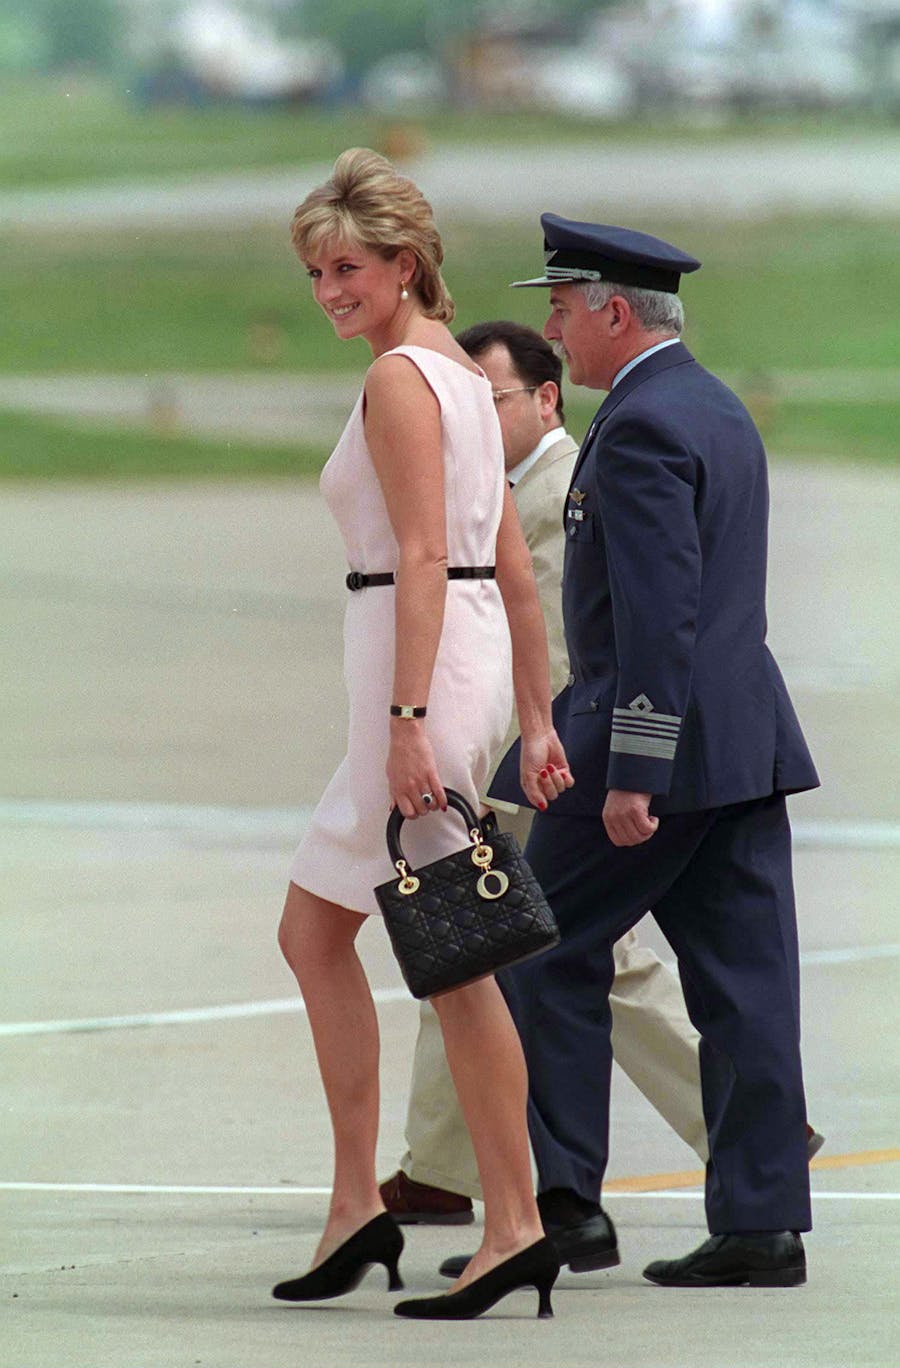 Princess Diana at Buenos Aires airport, Argentina with her Lady Dior bag, 1995. Photo by Tim Graham Photo Library via Getty Images